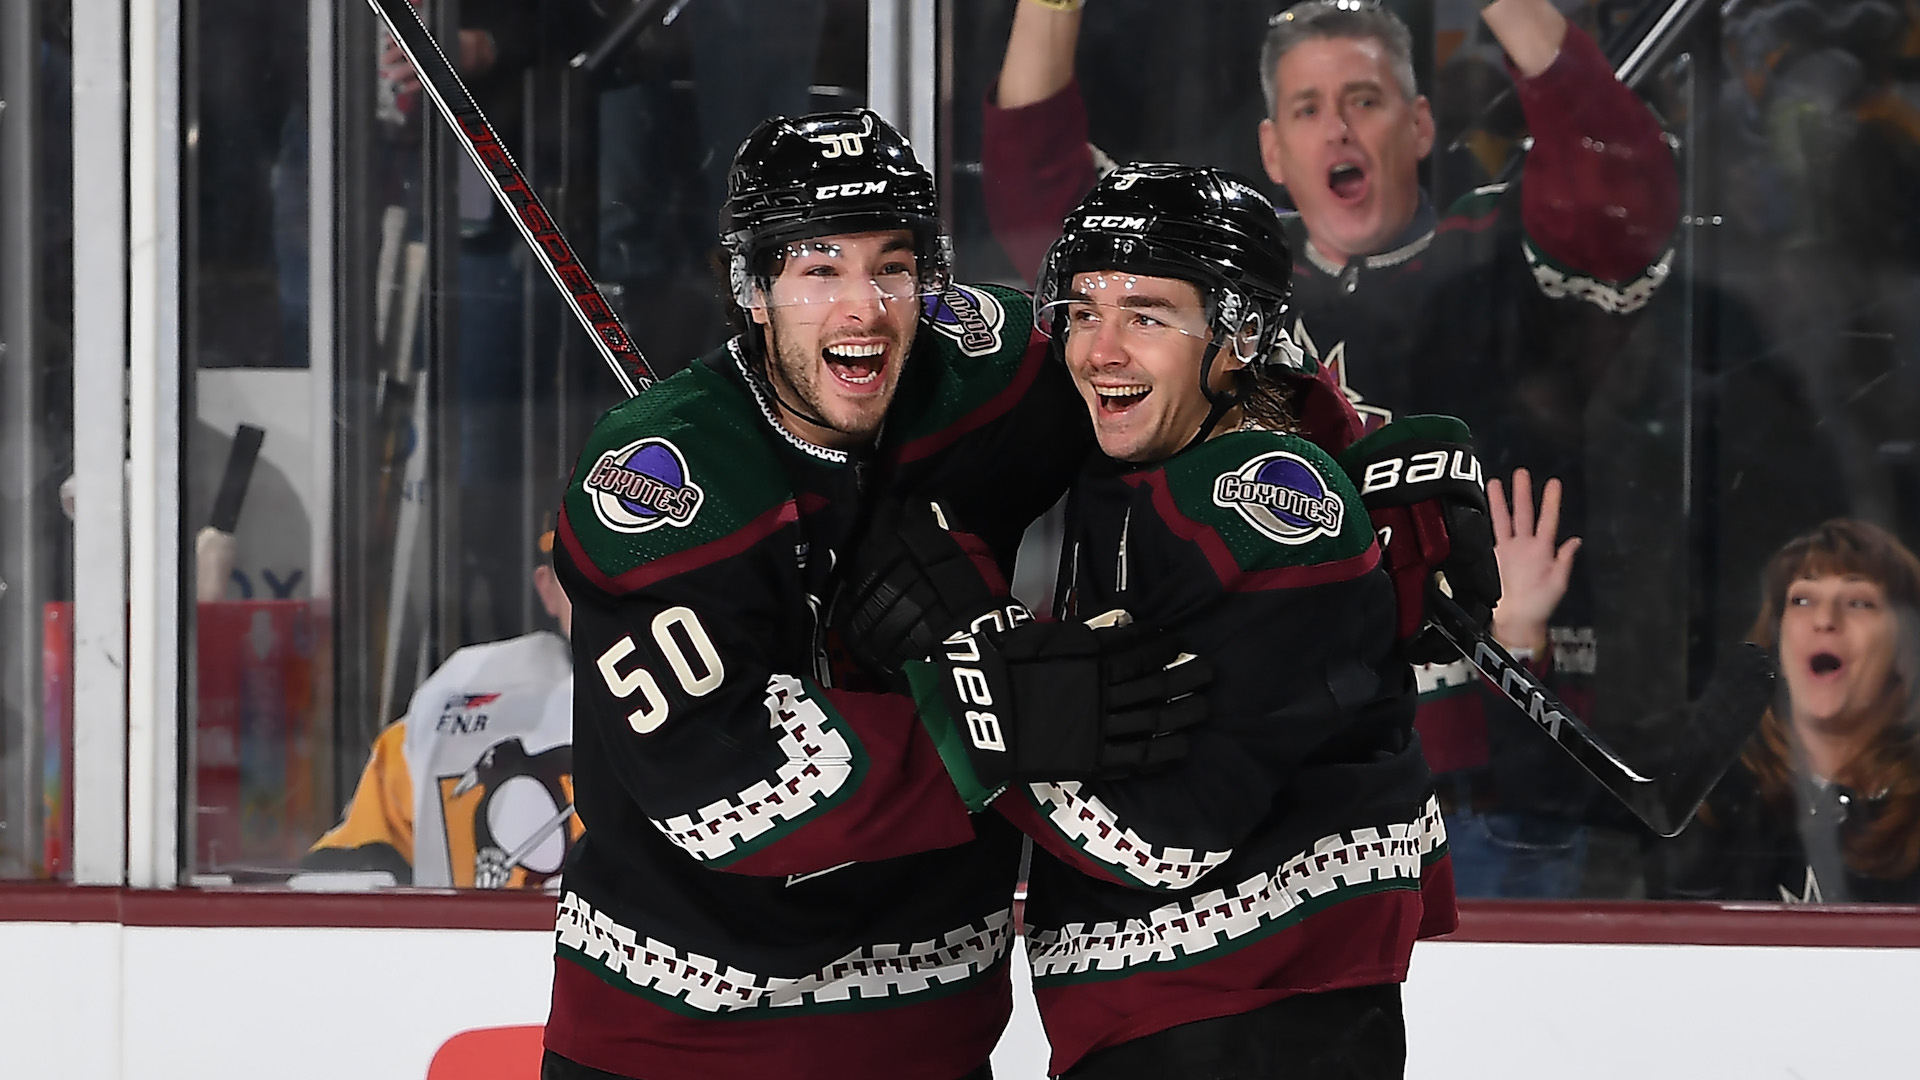 Clayton Keller #9 of the Arizona Coyotes celebrates with teammate Sean Durzi #50 after a goal scored by Lawson Crouse.